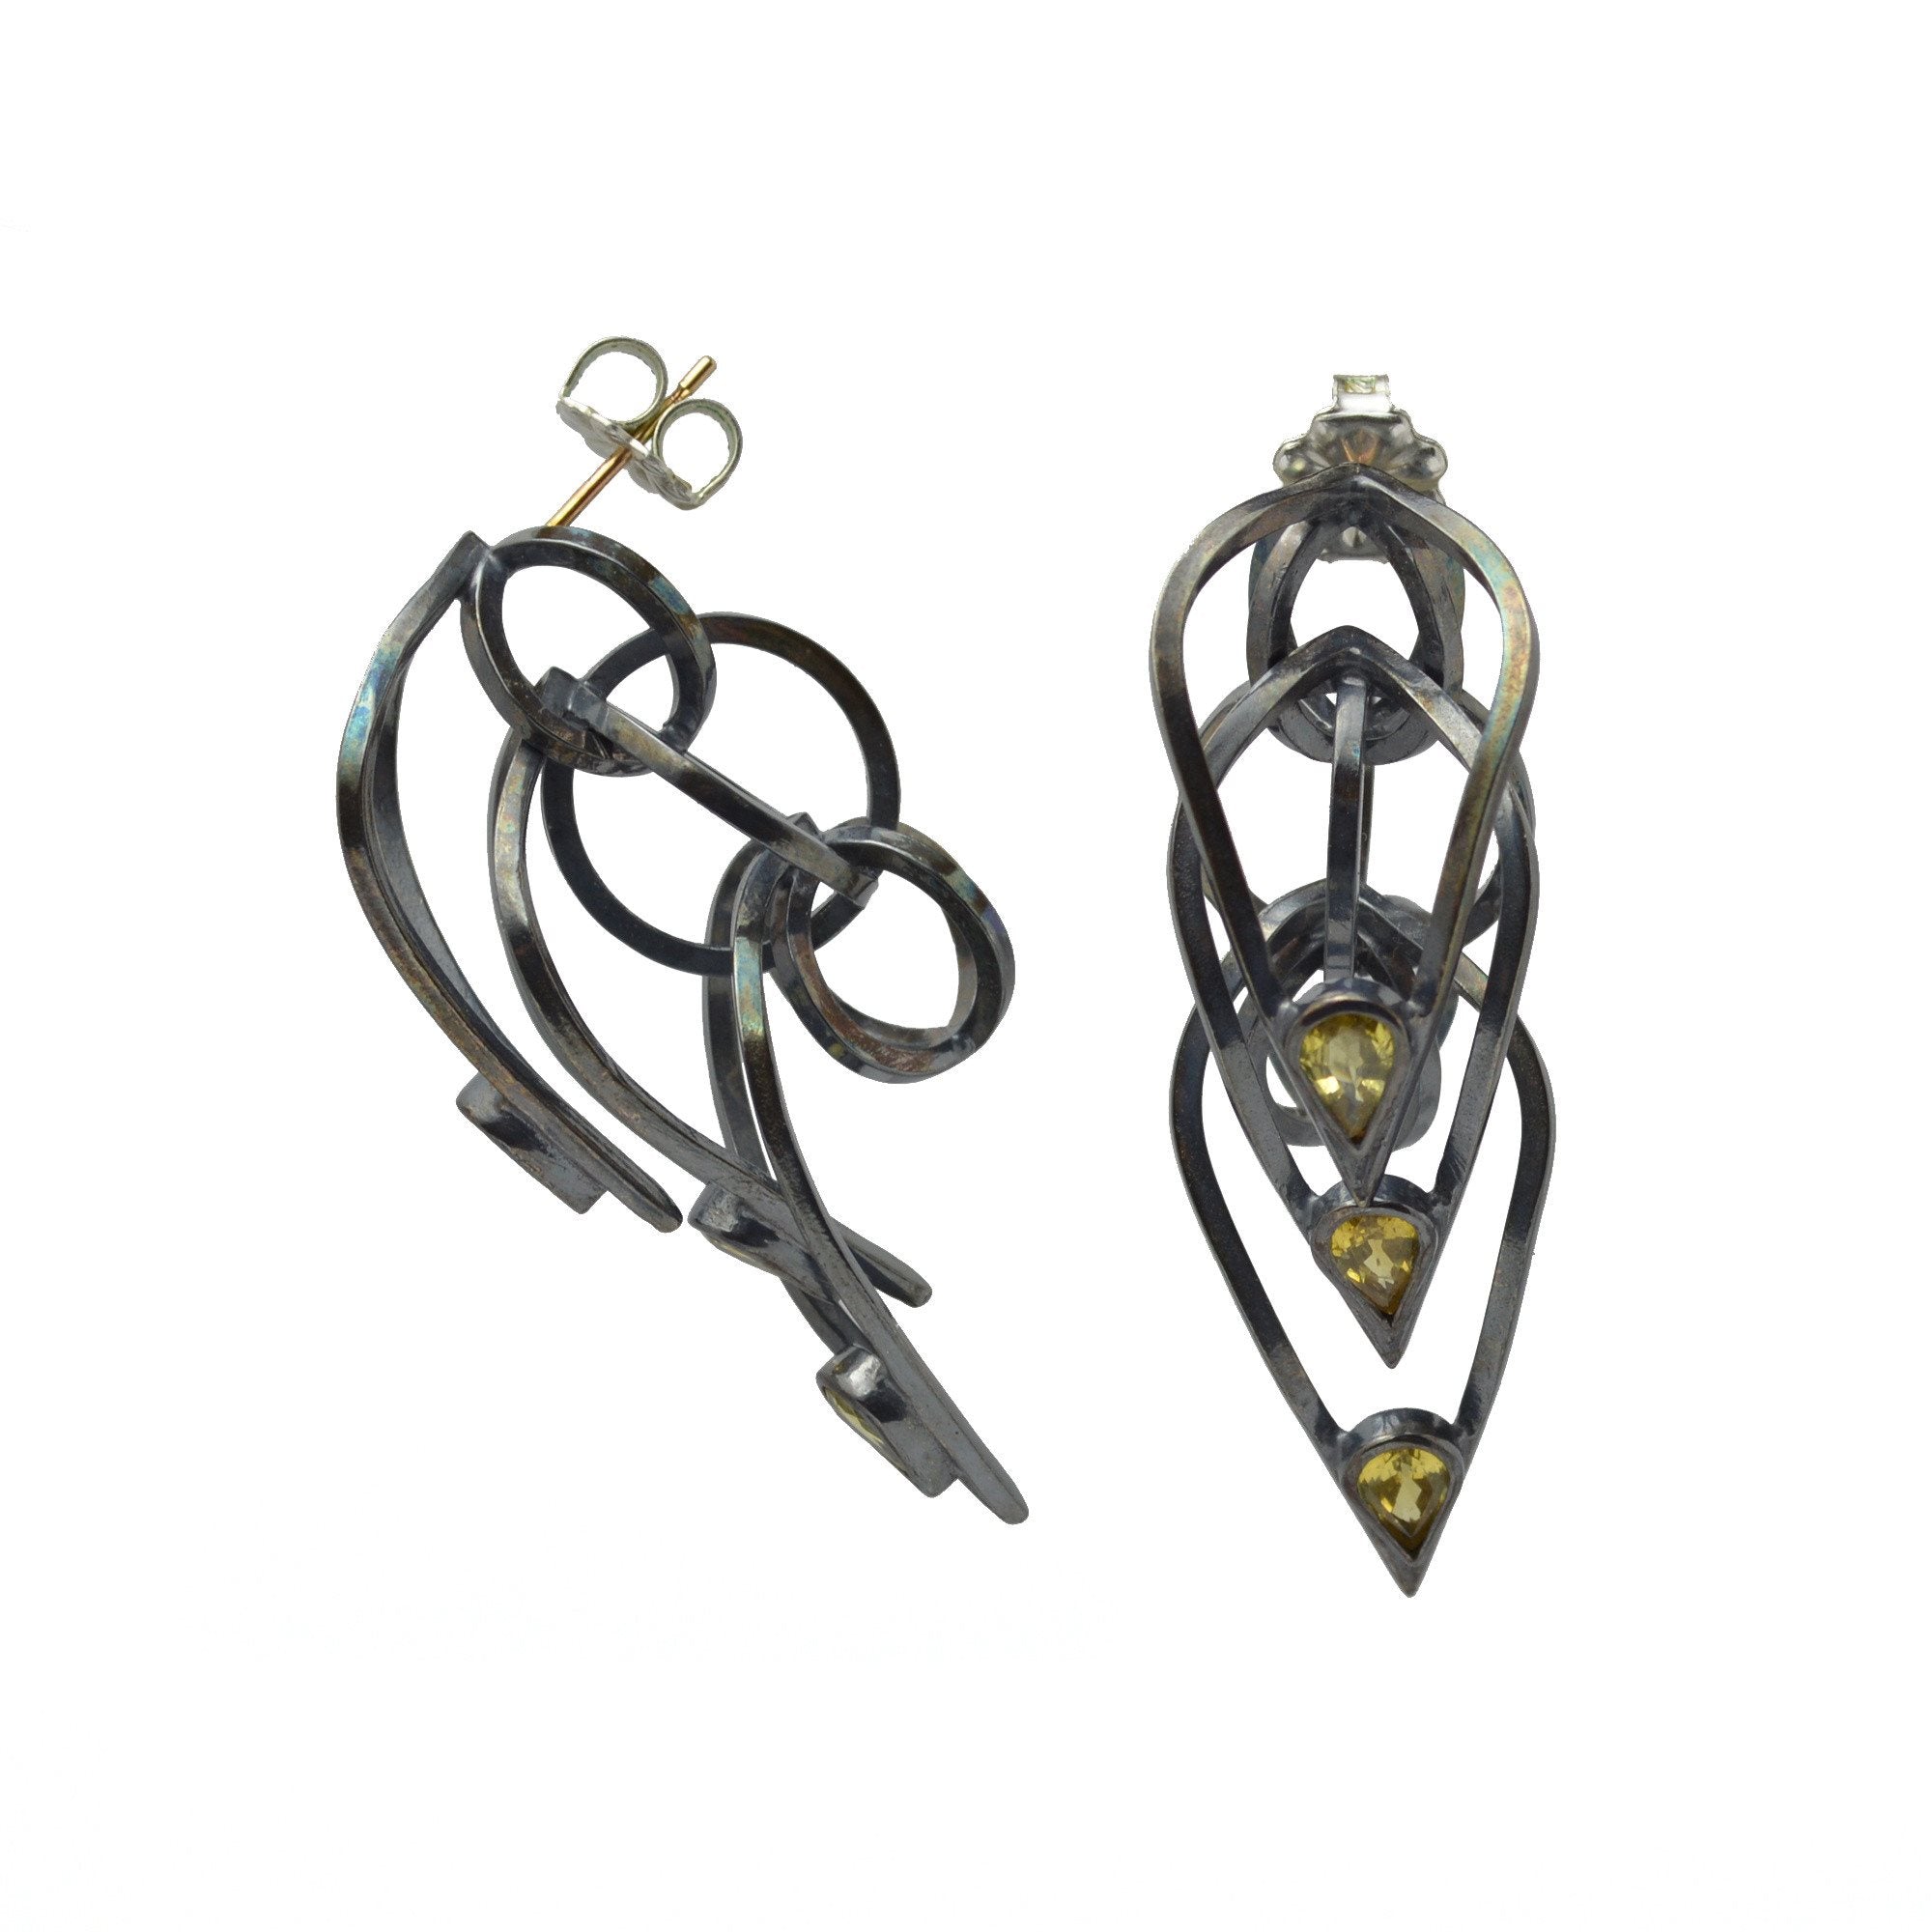 Tighra Earrings in Sterling Silver, Black Patina, Yellow Sapphires